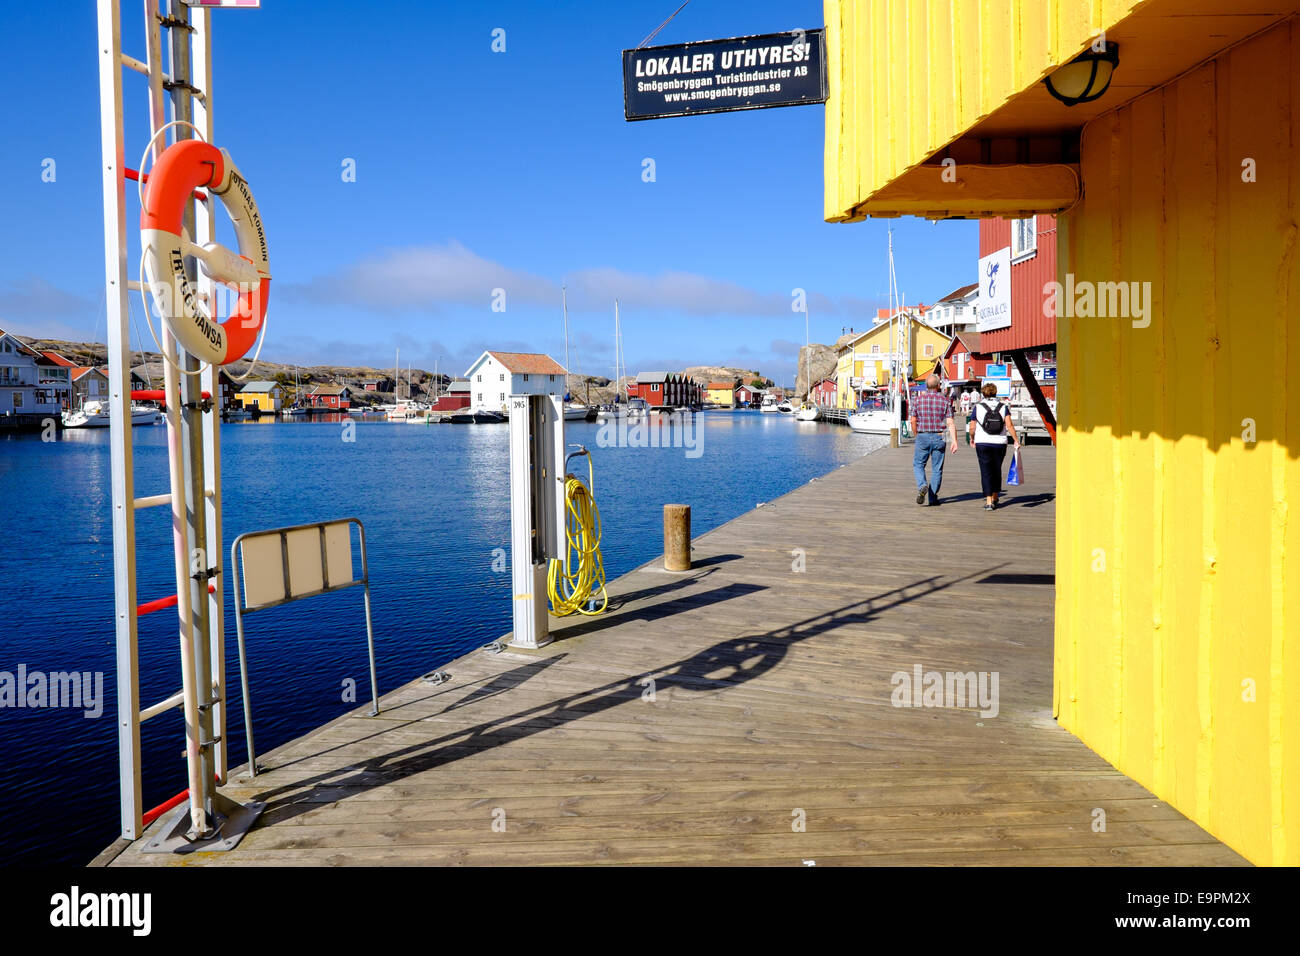 The boardwalk in Smogen, Sweden. Smogen is a famous fishing village and popular tourist destination. Stock Photo